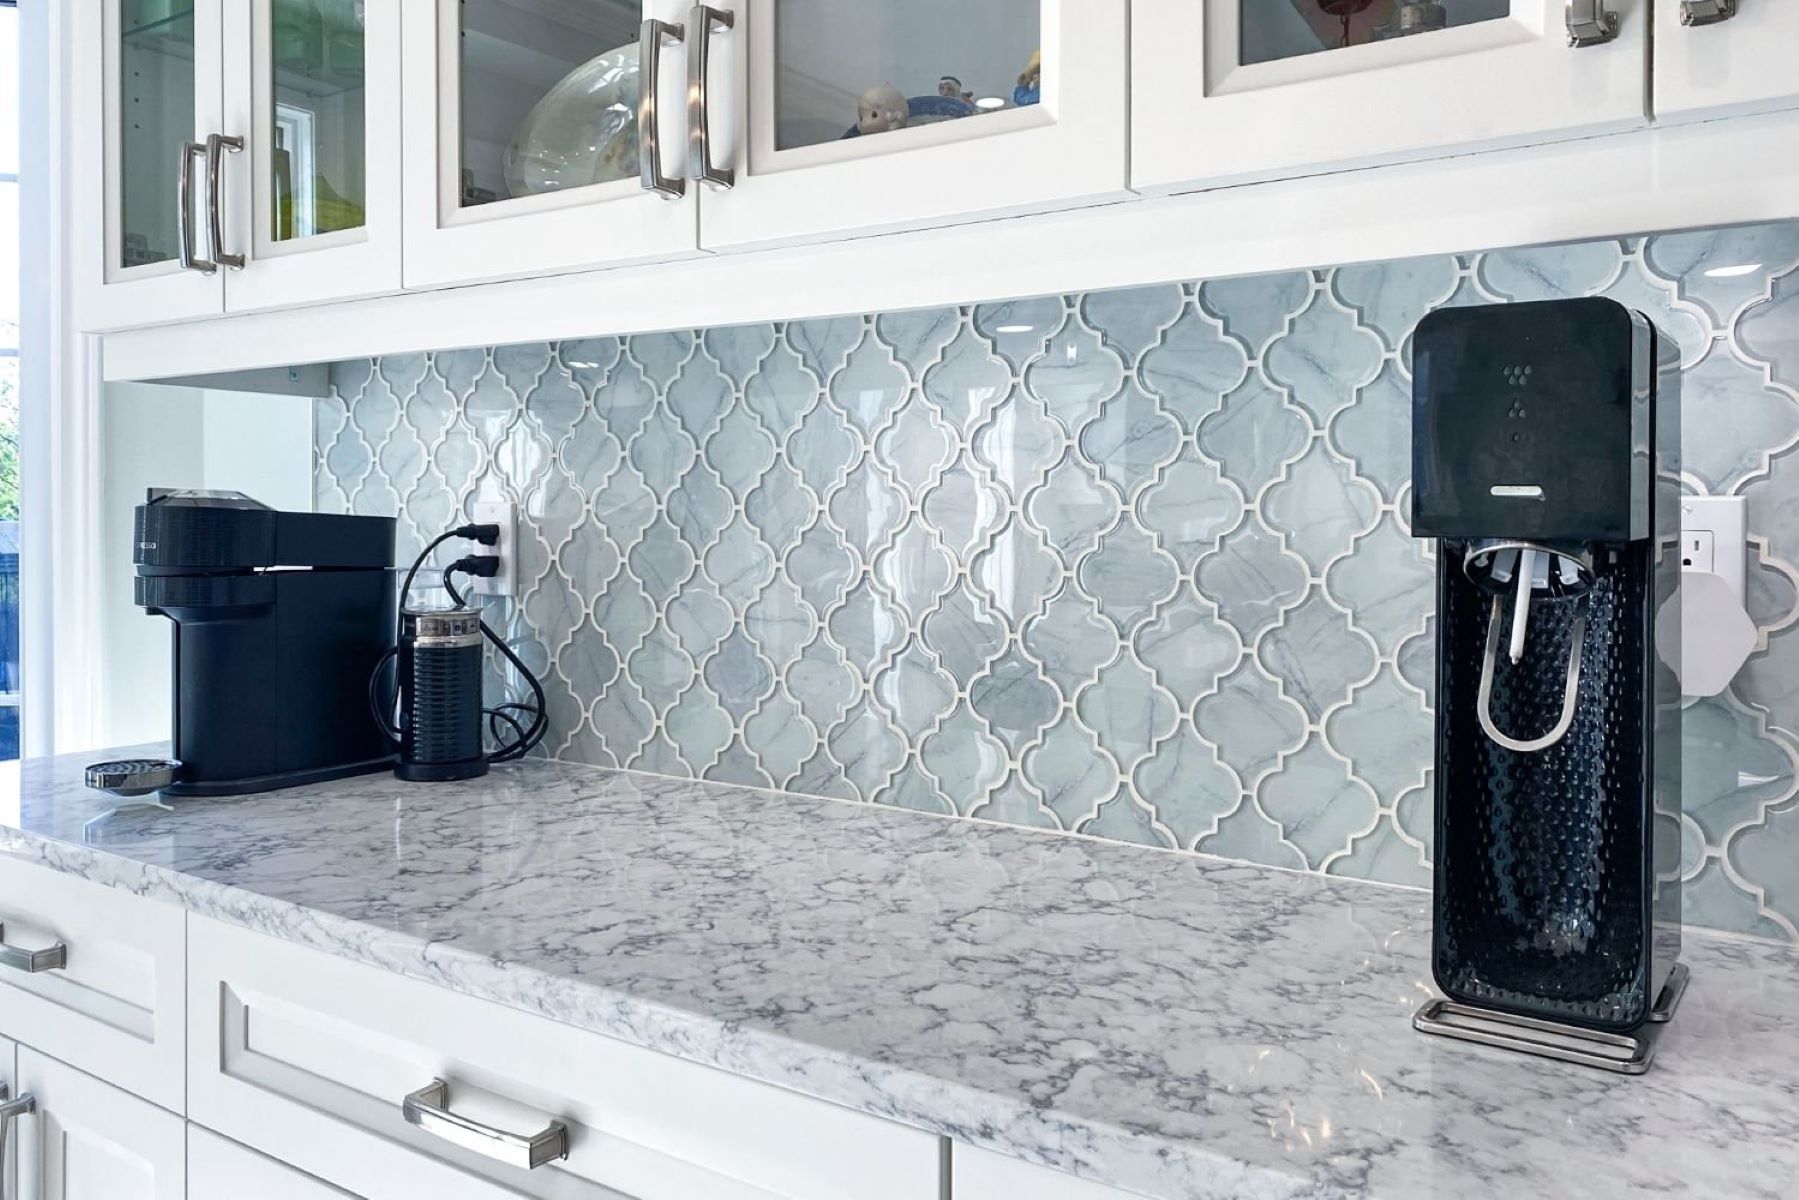 What Is The Most Popular Backsplash For The Kitchen?